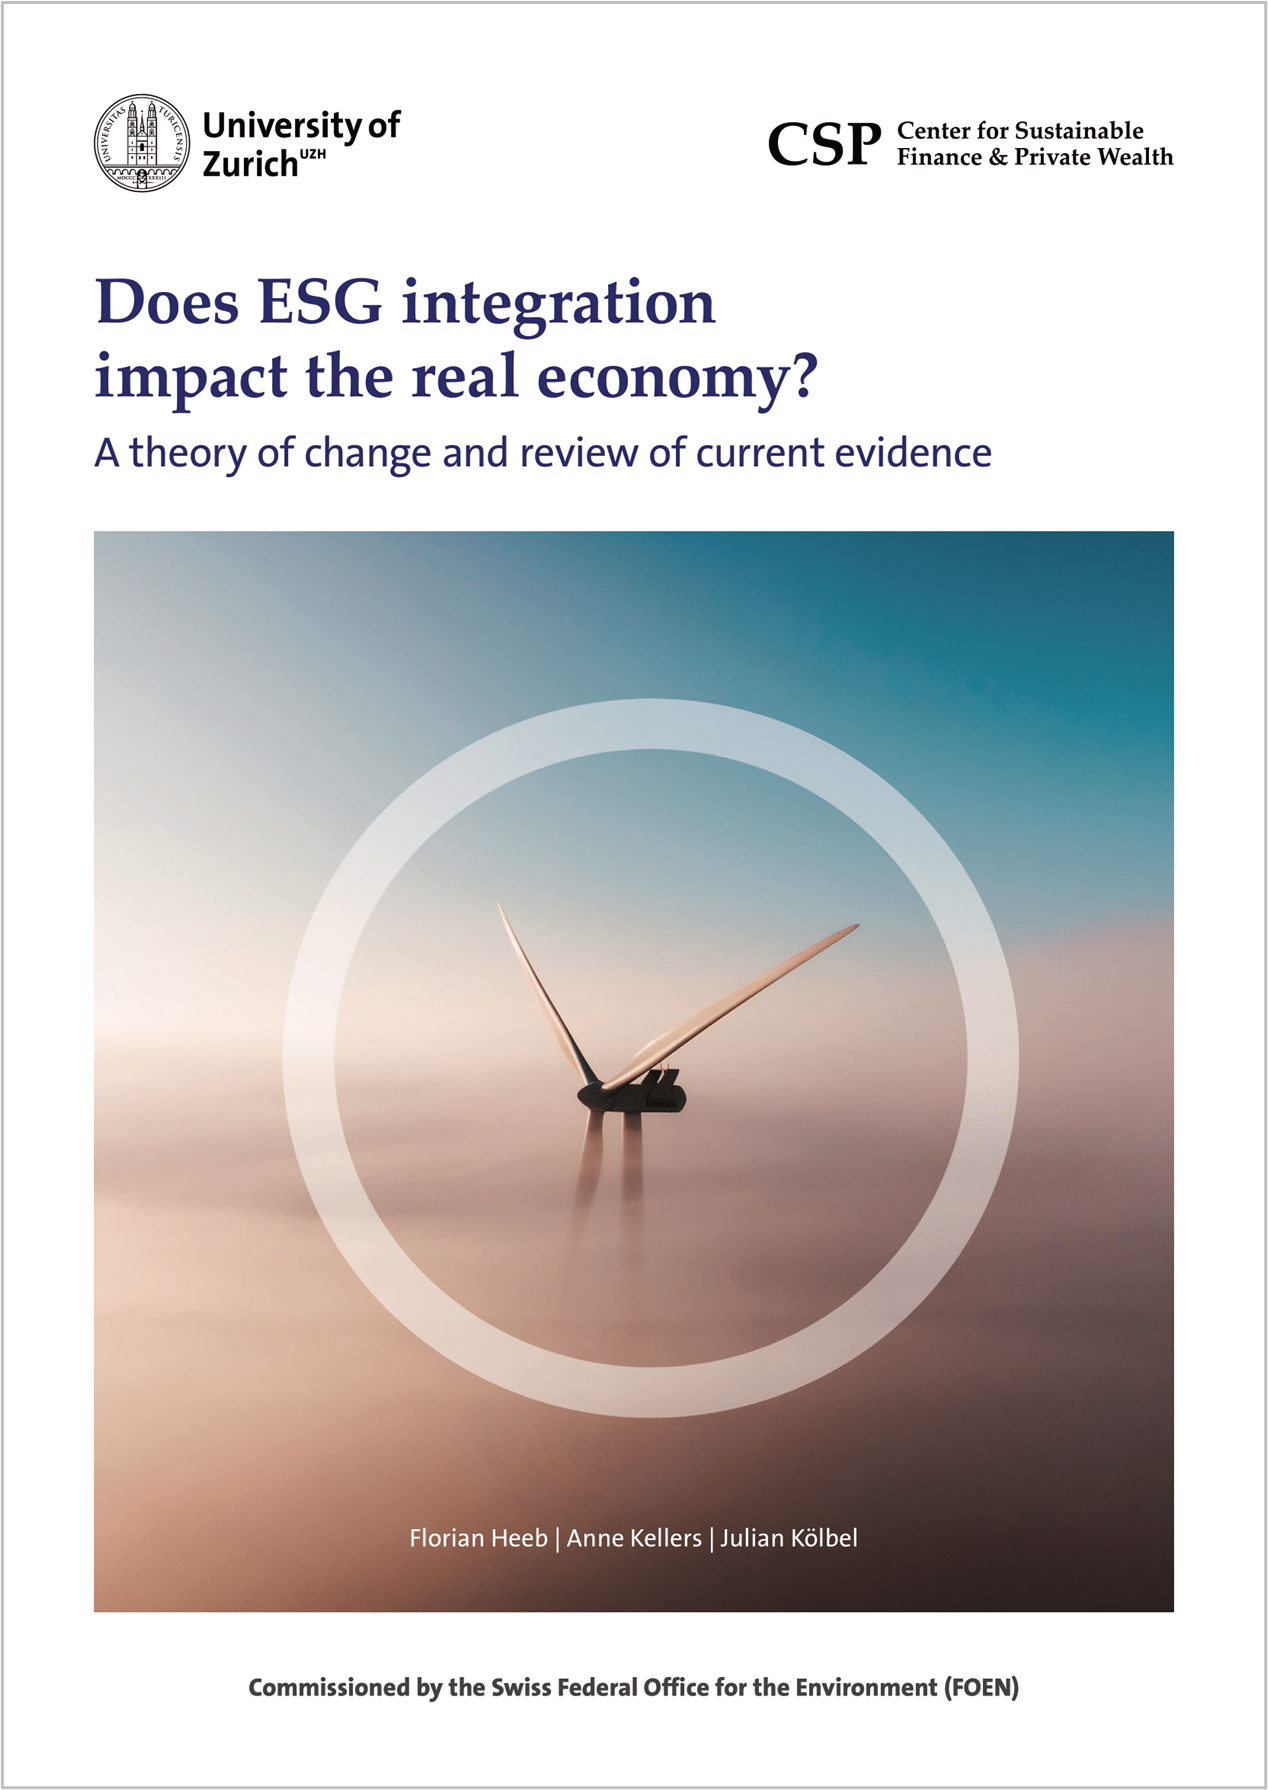 Report cover: does ESG integration impact the real economy?